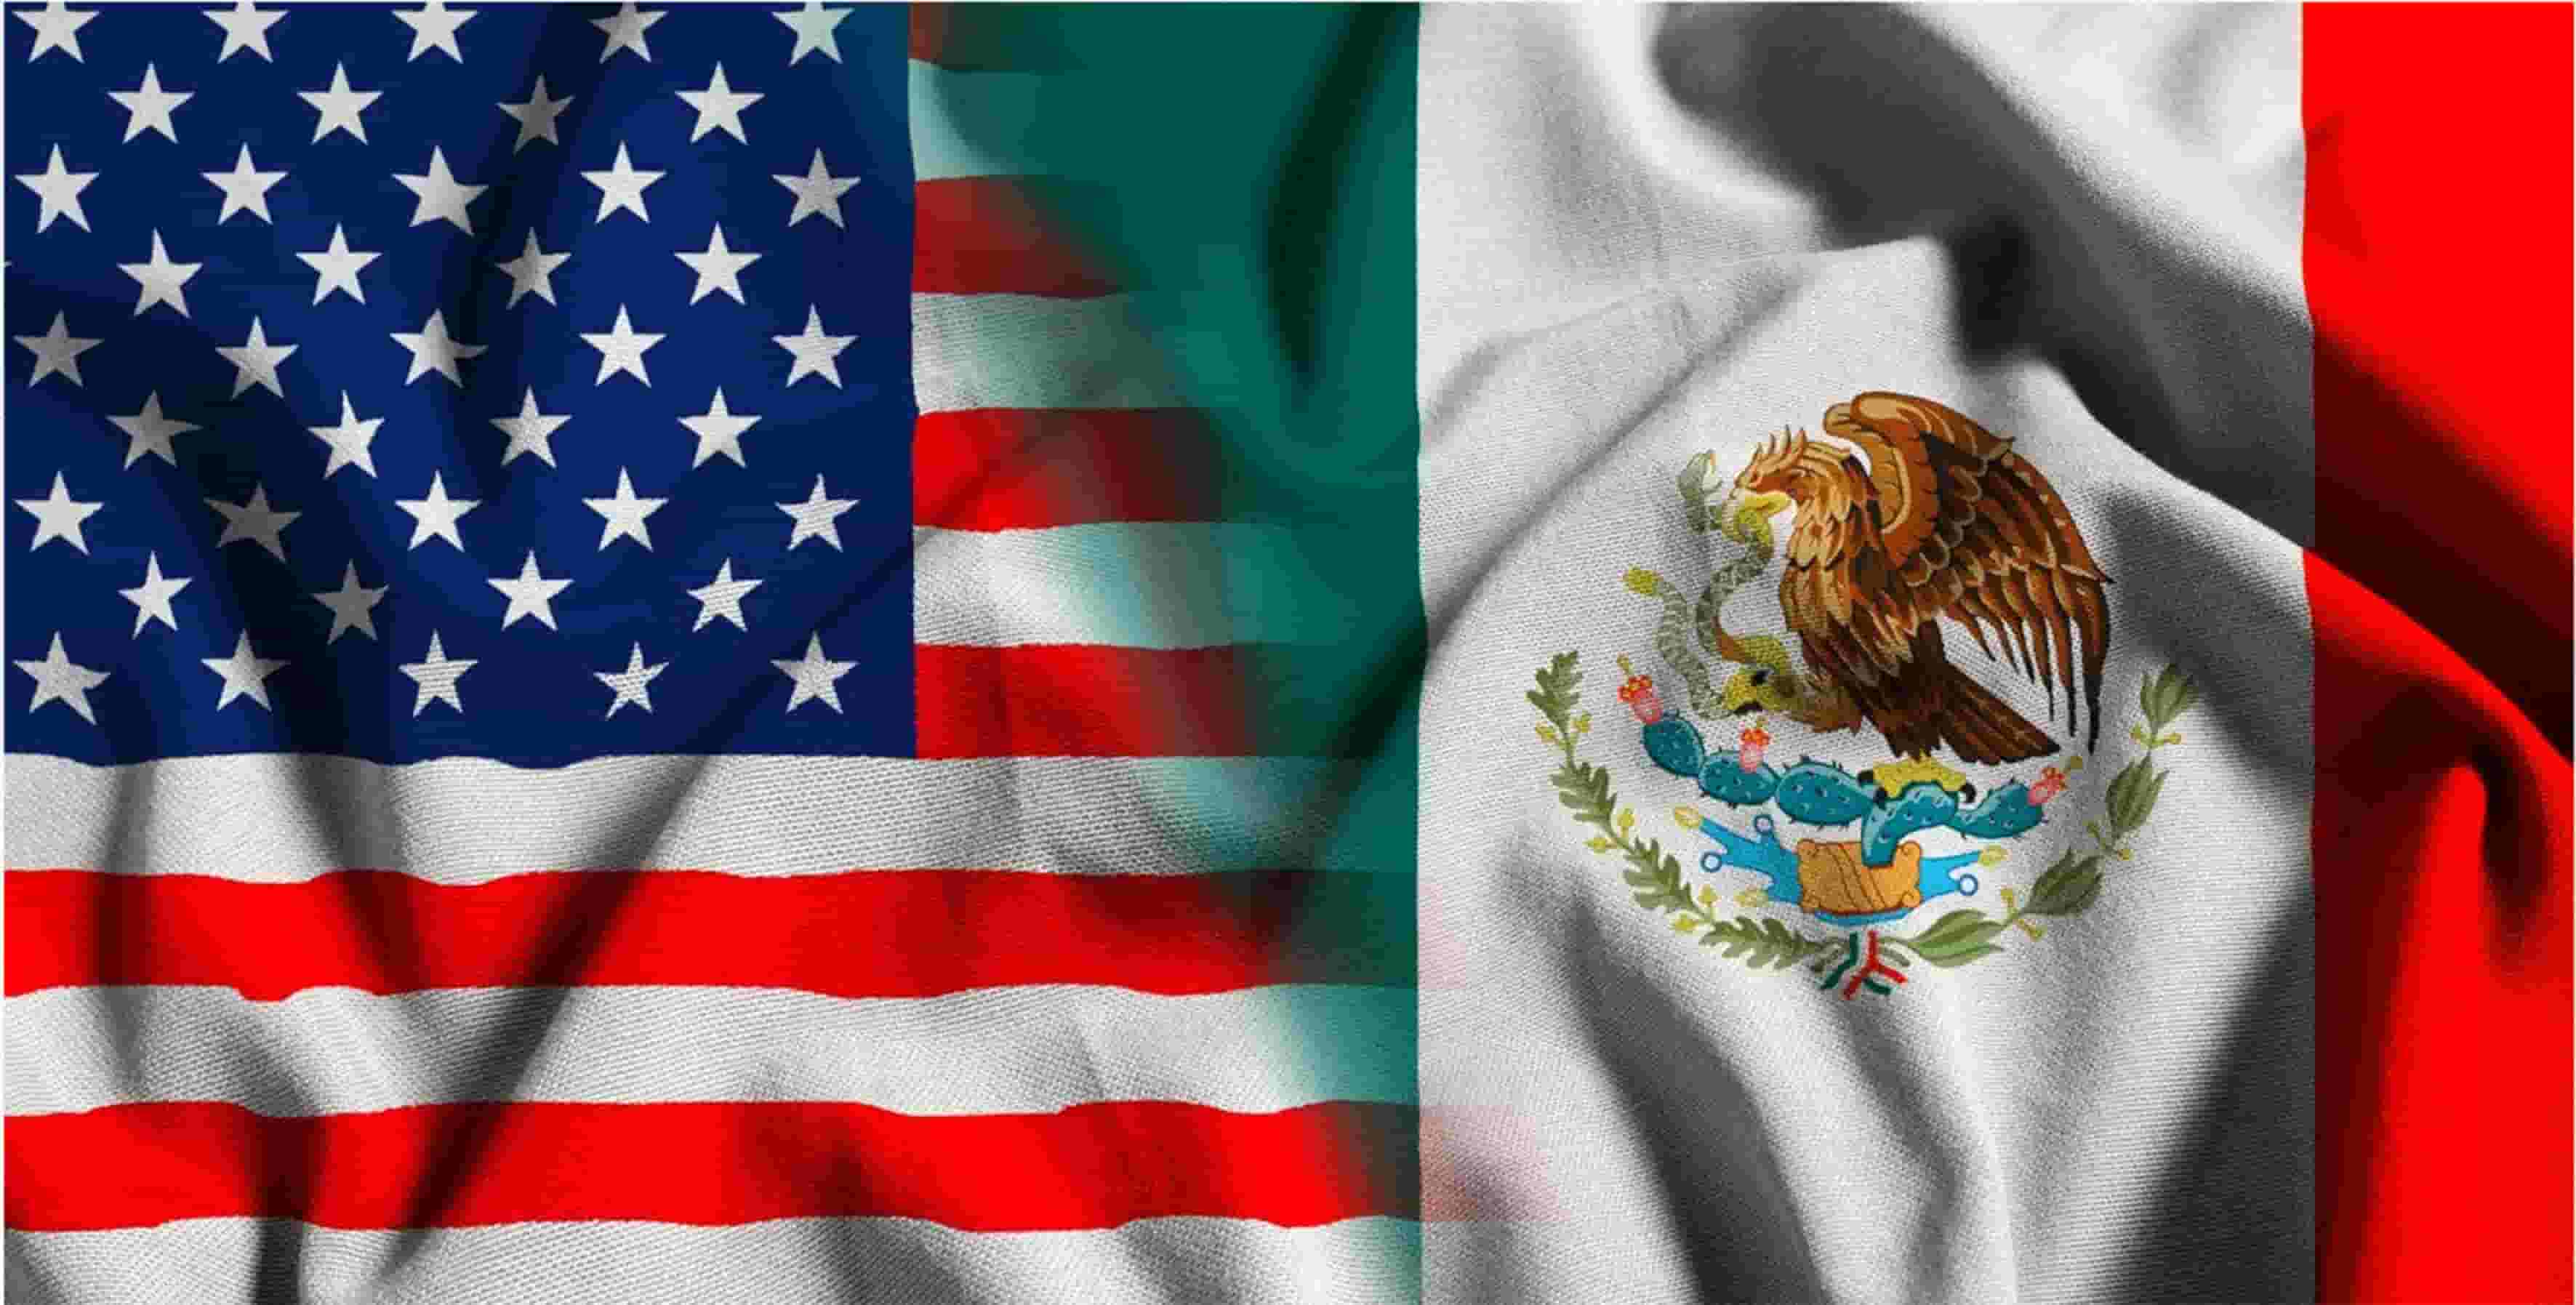 The bicentennial understanding signals an alliance between the political leaders of the United States and Mexico.